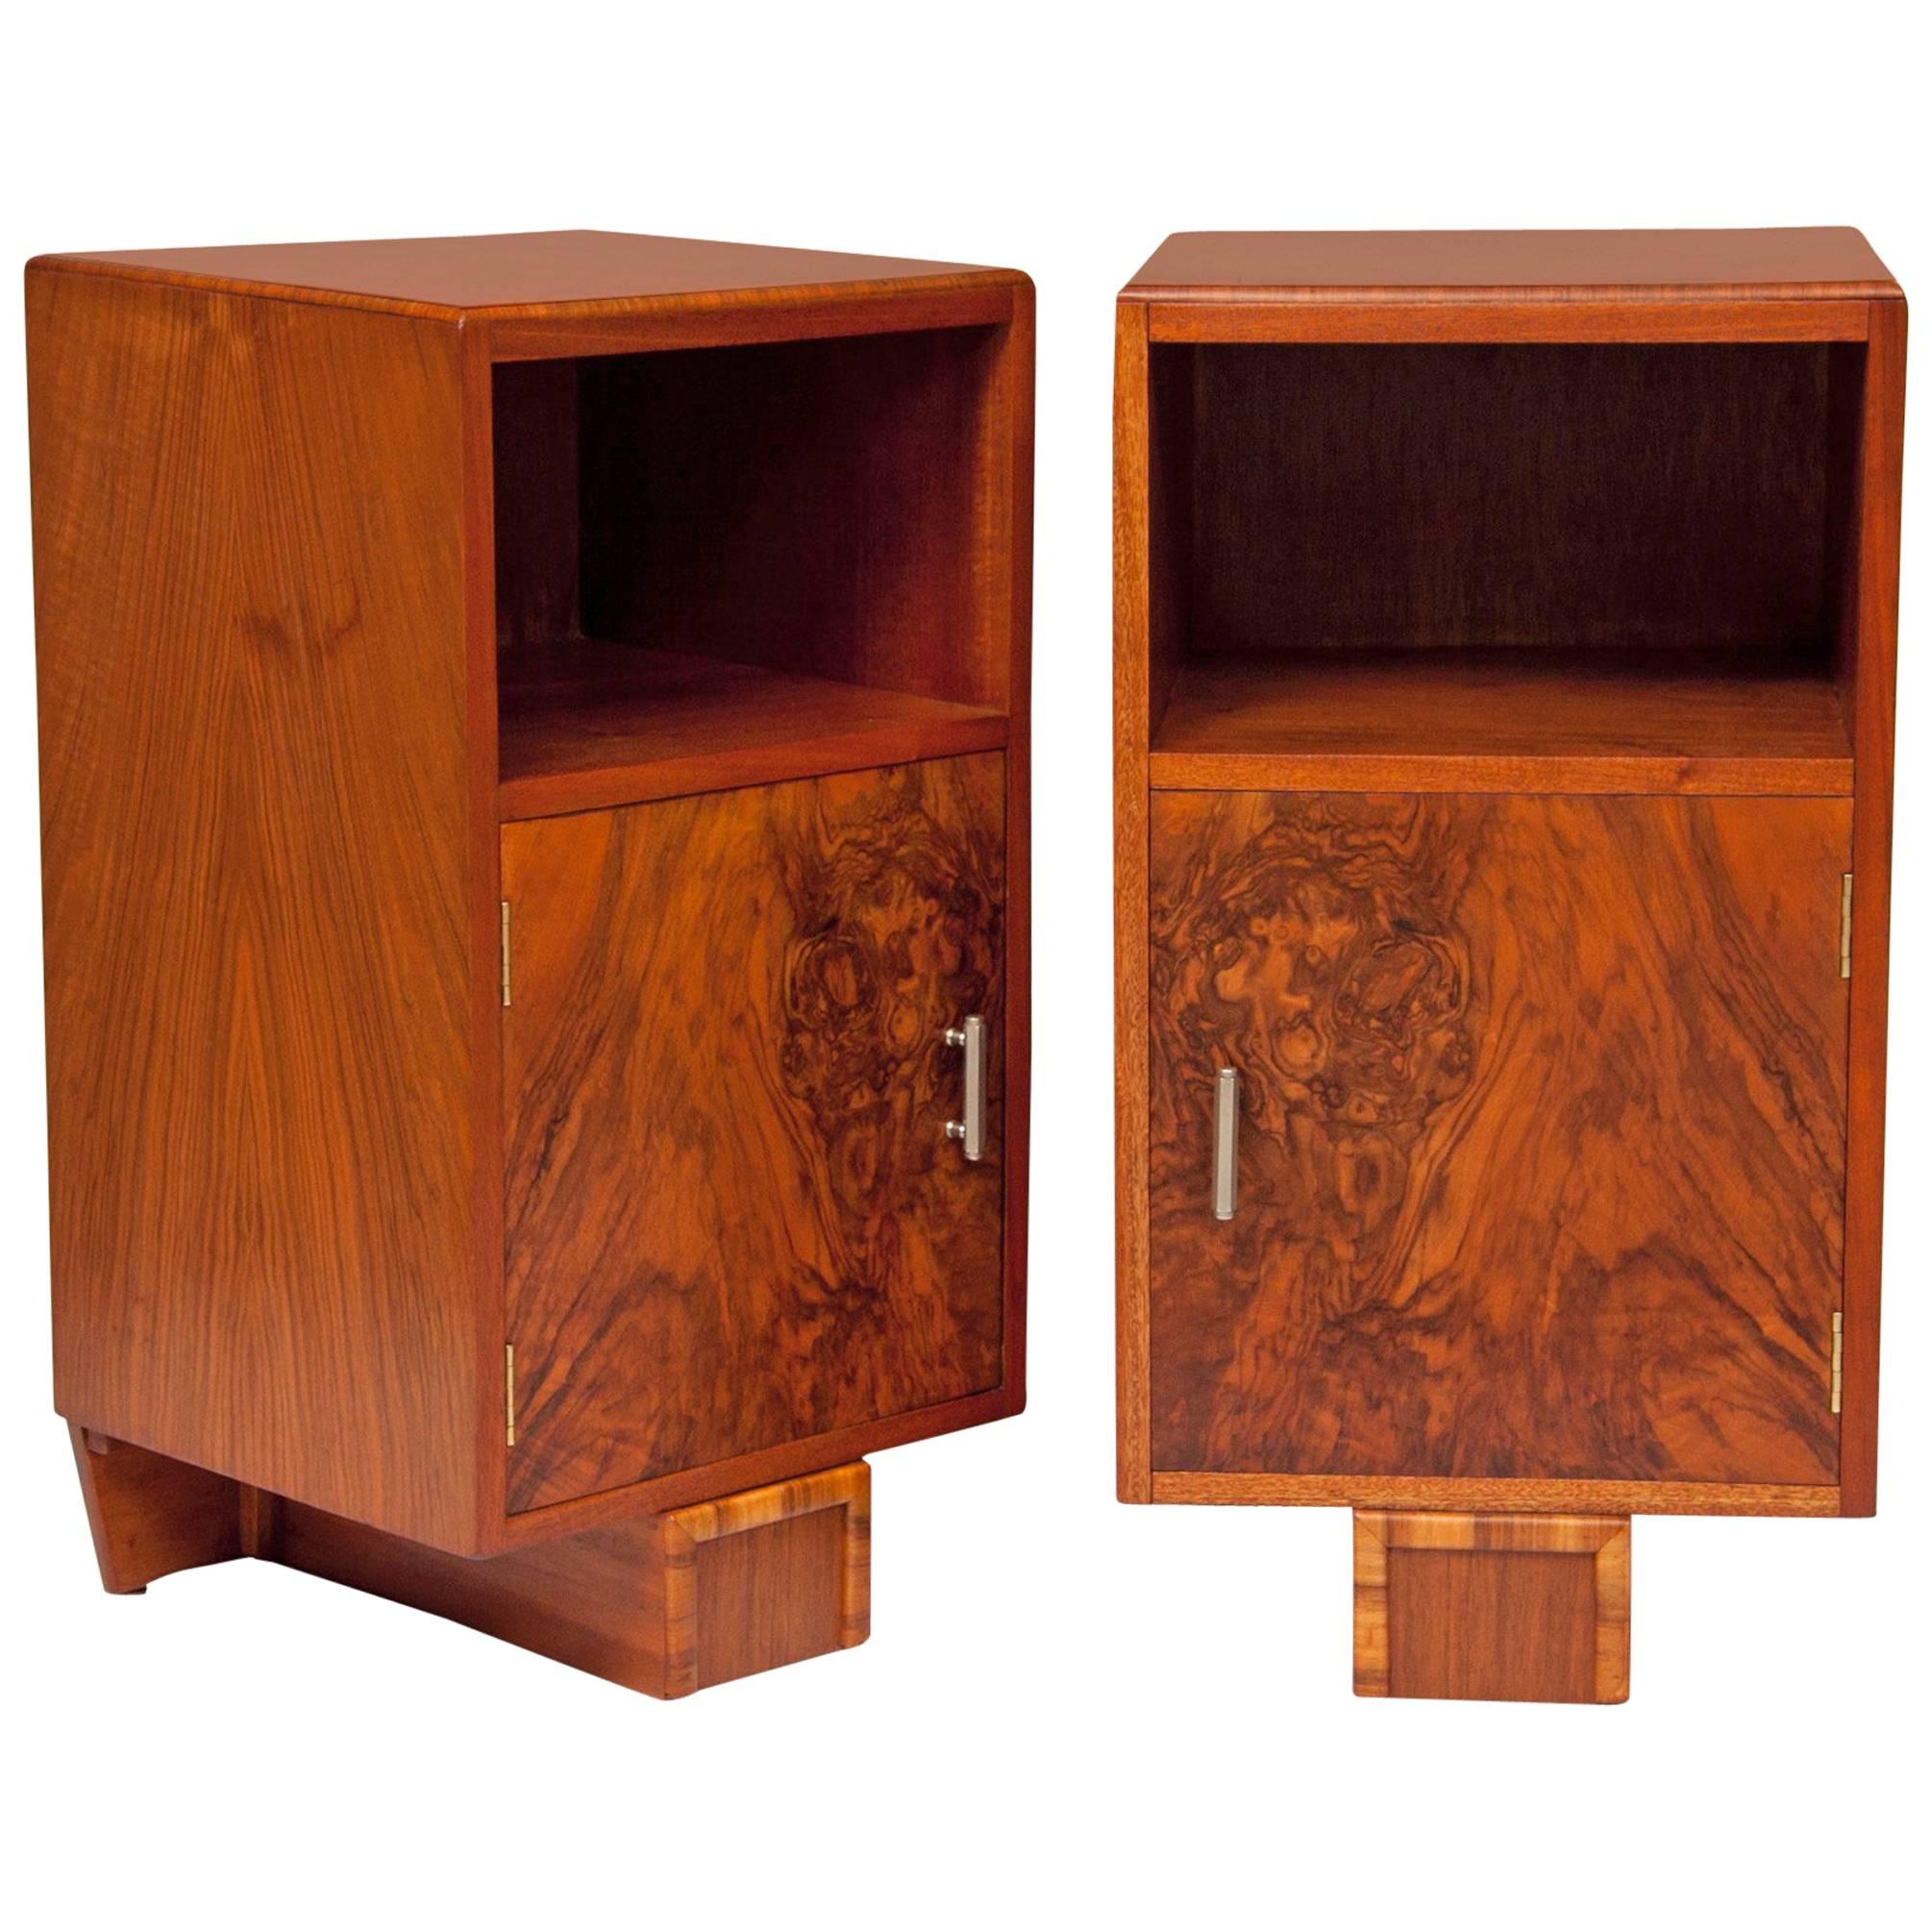 Art Deco Bedside Cabinets by Aw Lyn